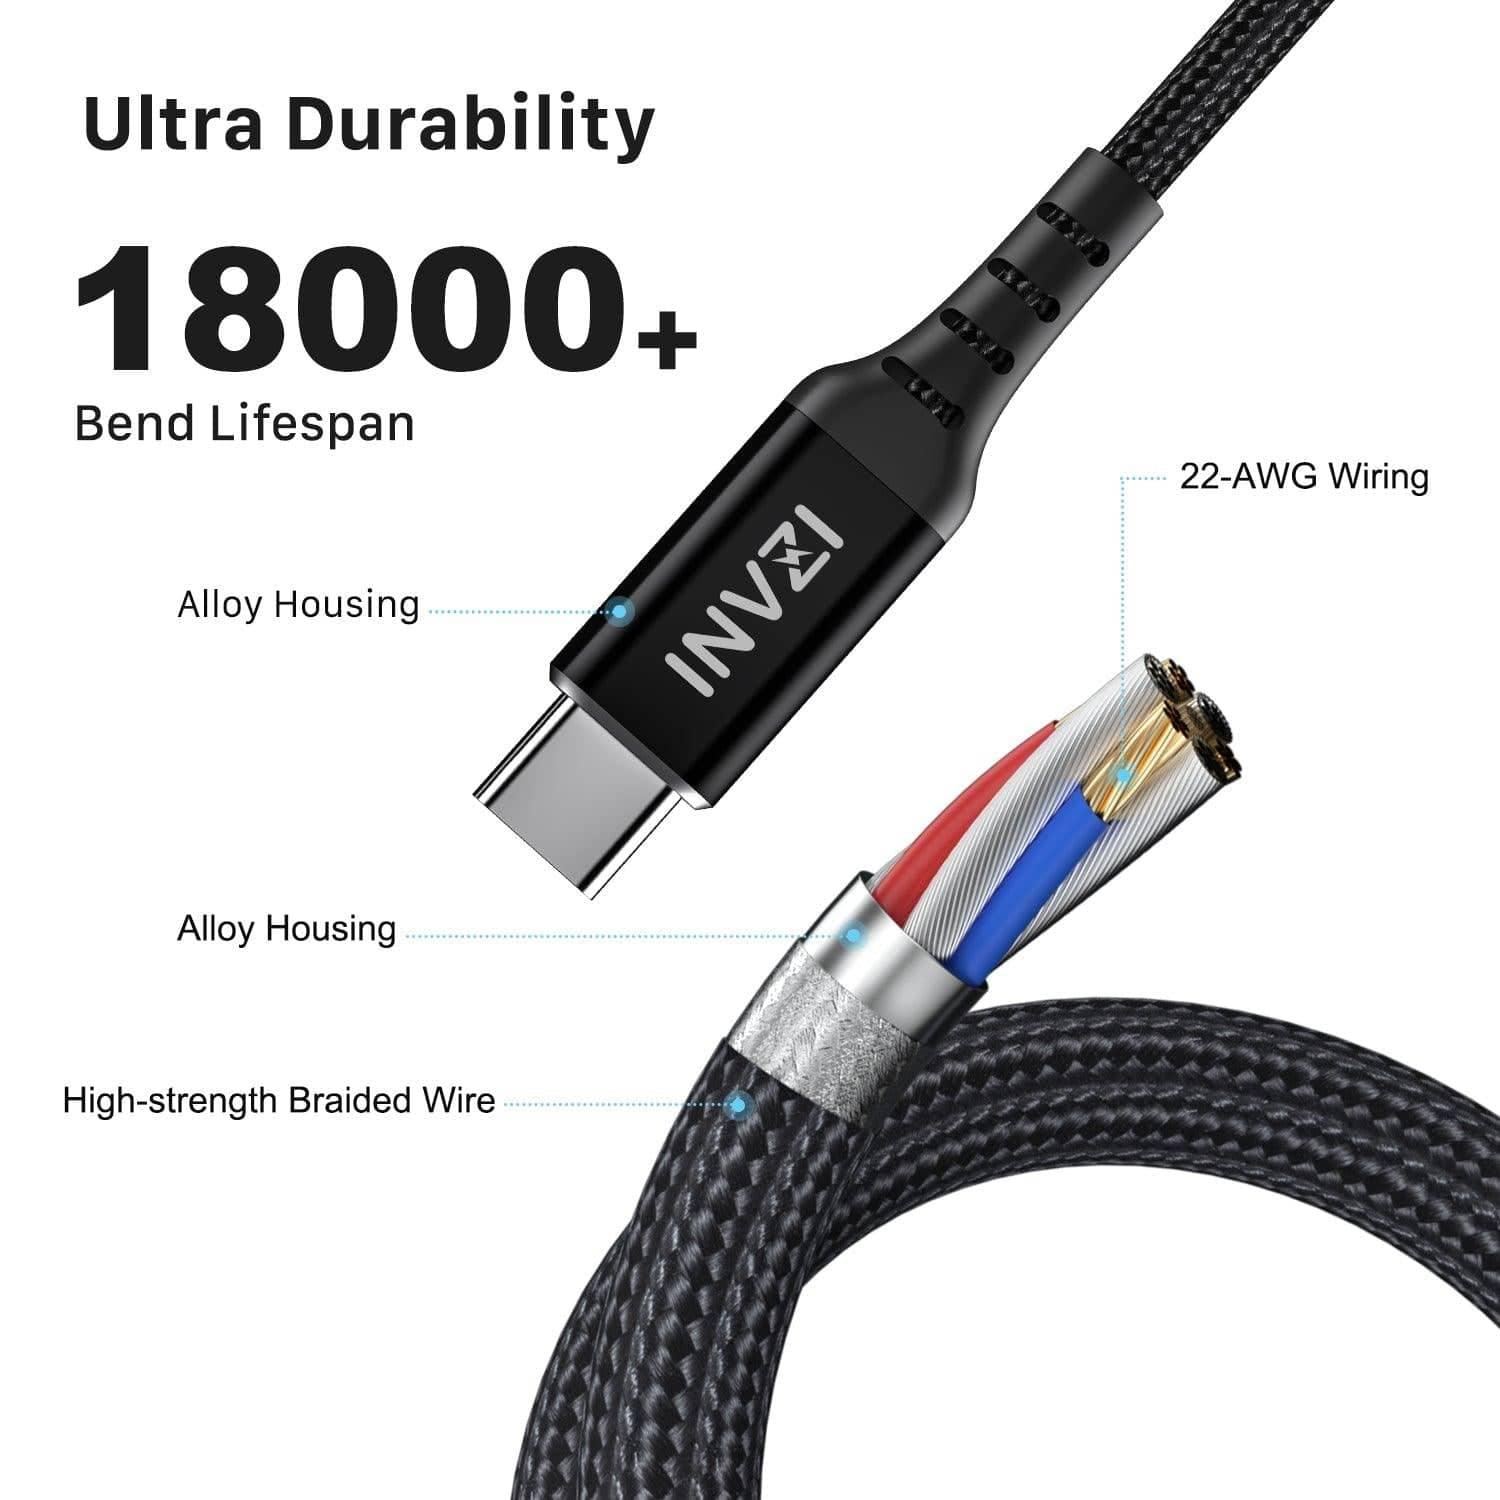 INVZI Storage & Data Transfer Cables INVZI MFi USB-C to Lightning Cable 6.6ft(2m) for iPhone